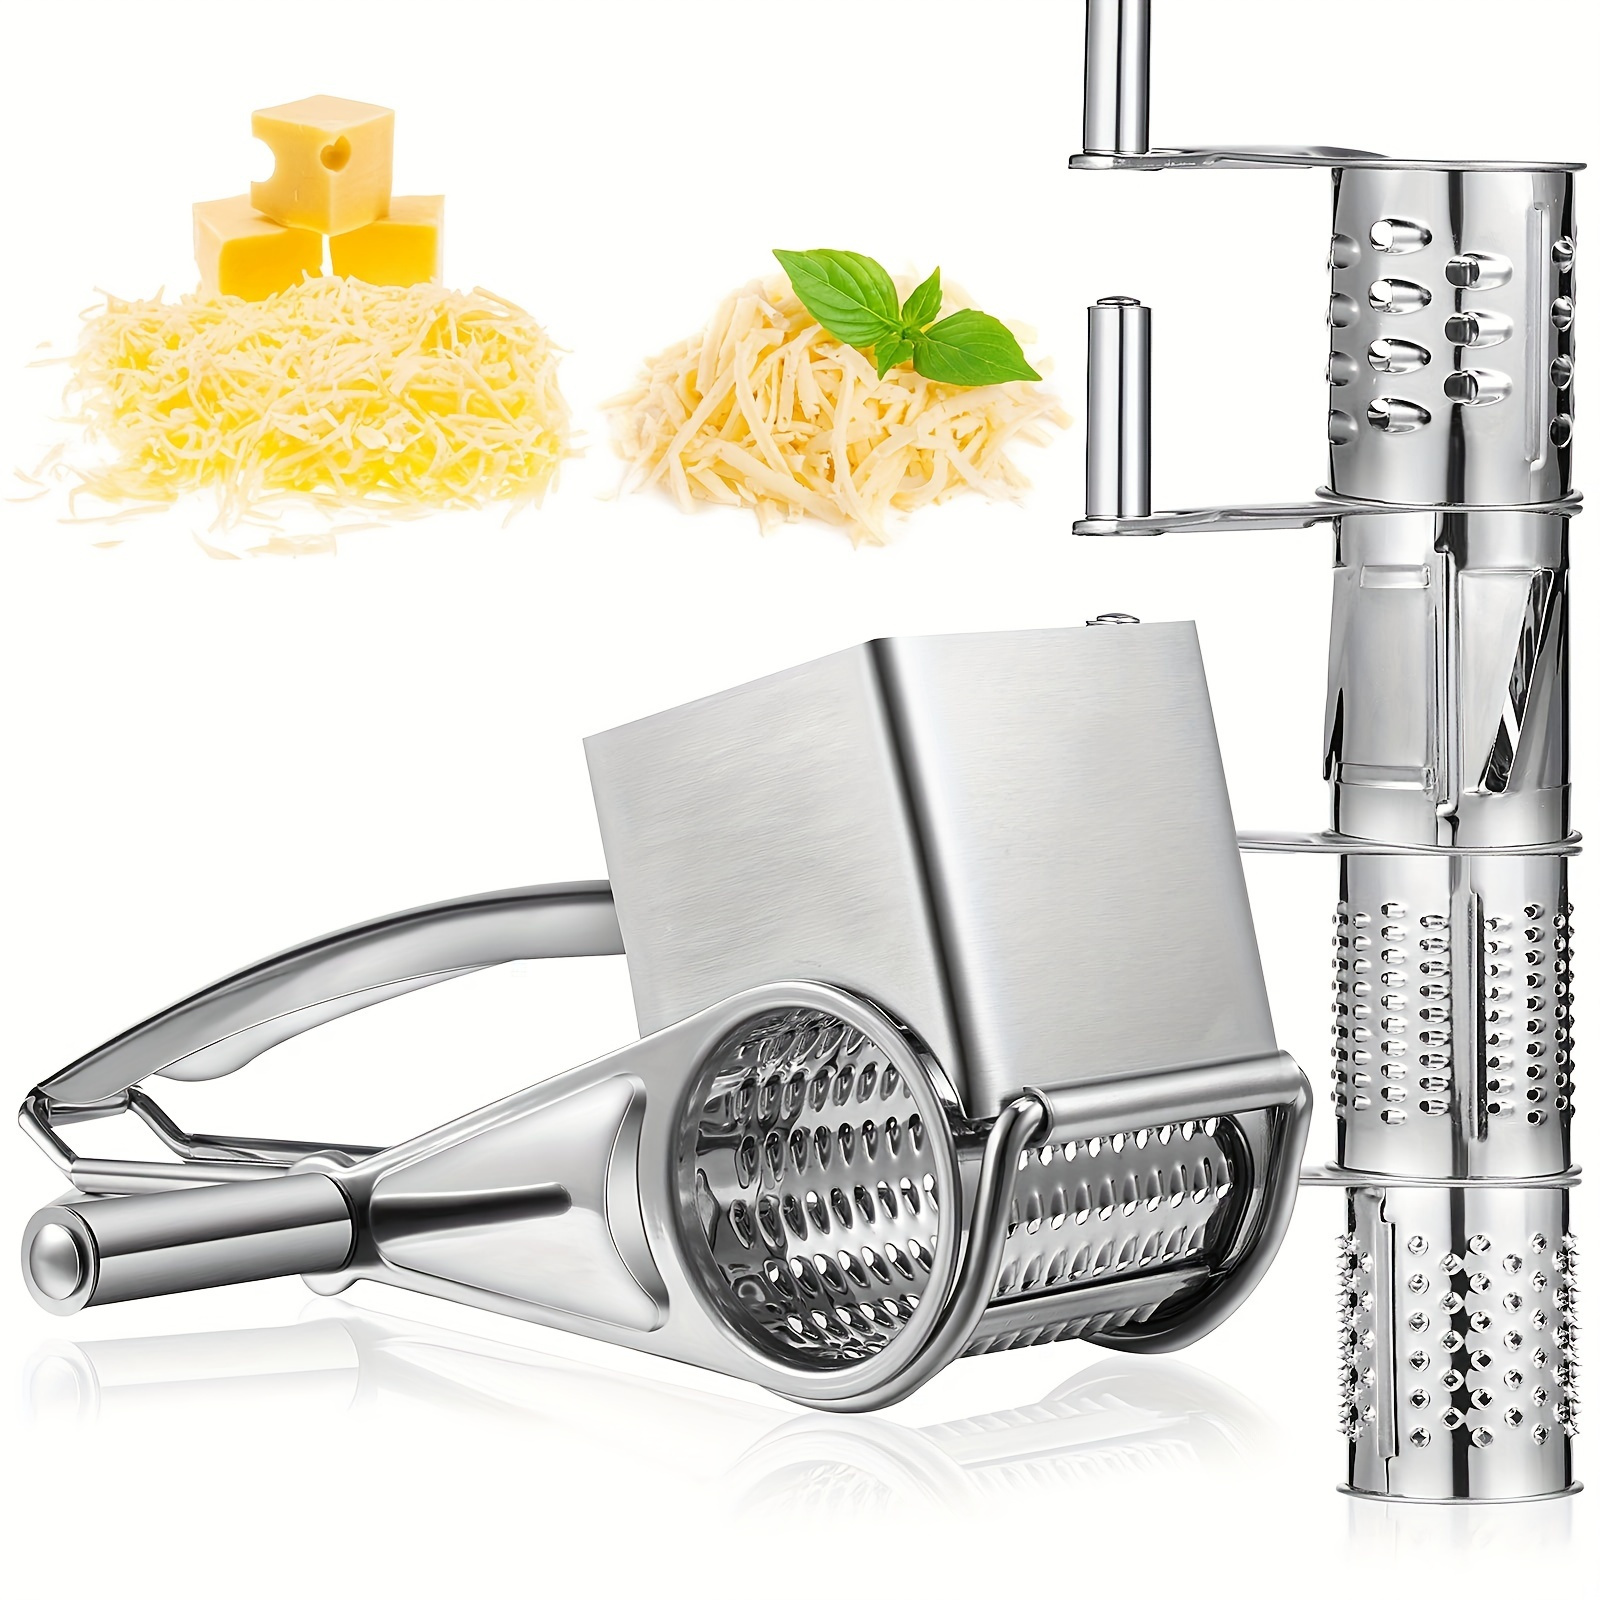 Rotary Cheese Grater with Drum Blades Stainless Steel Manual